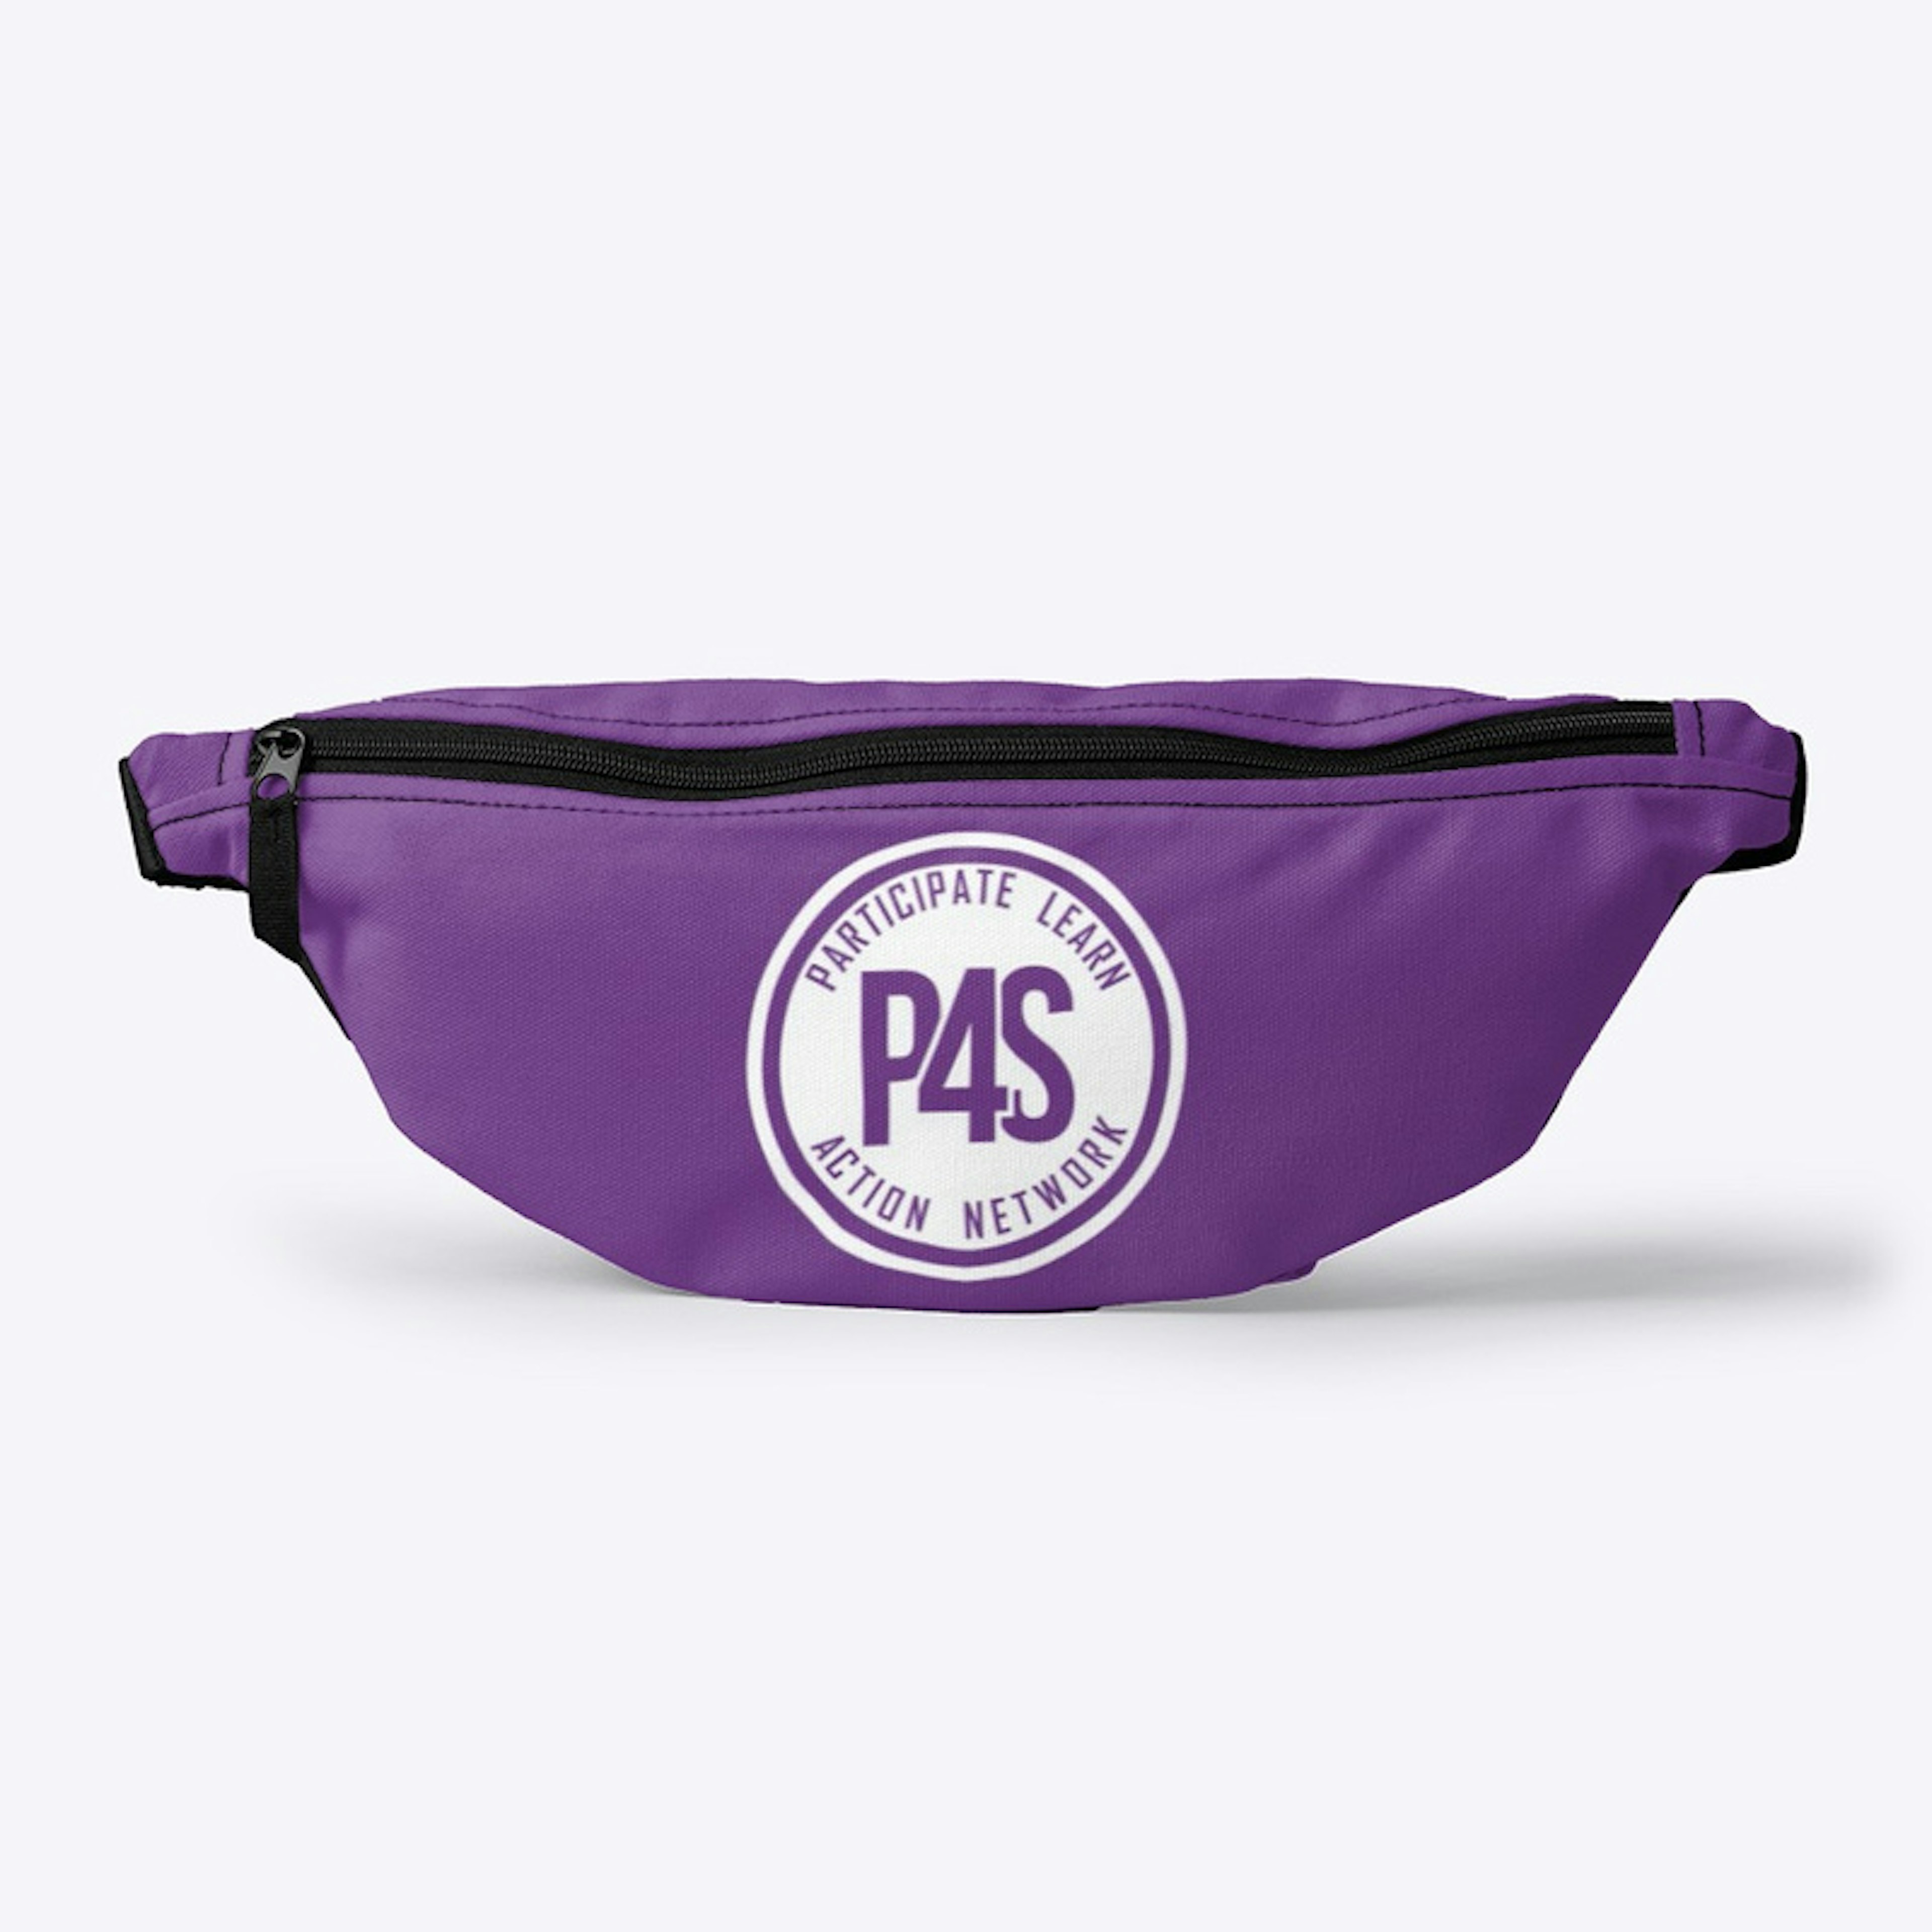 P4S Fanny Pack 4